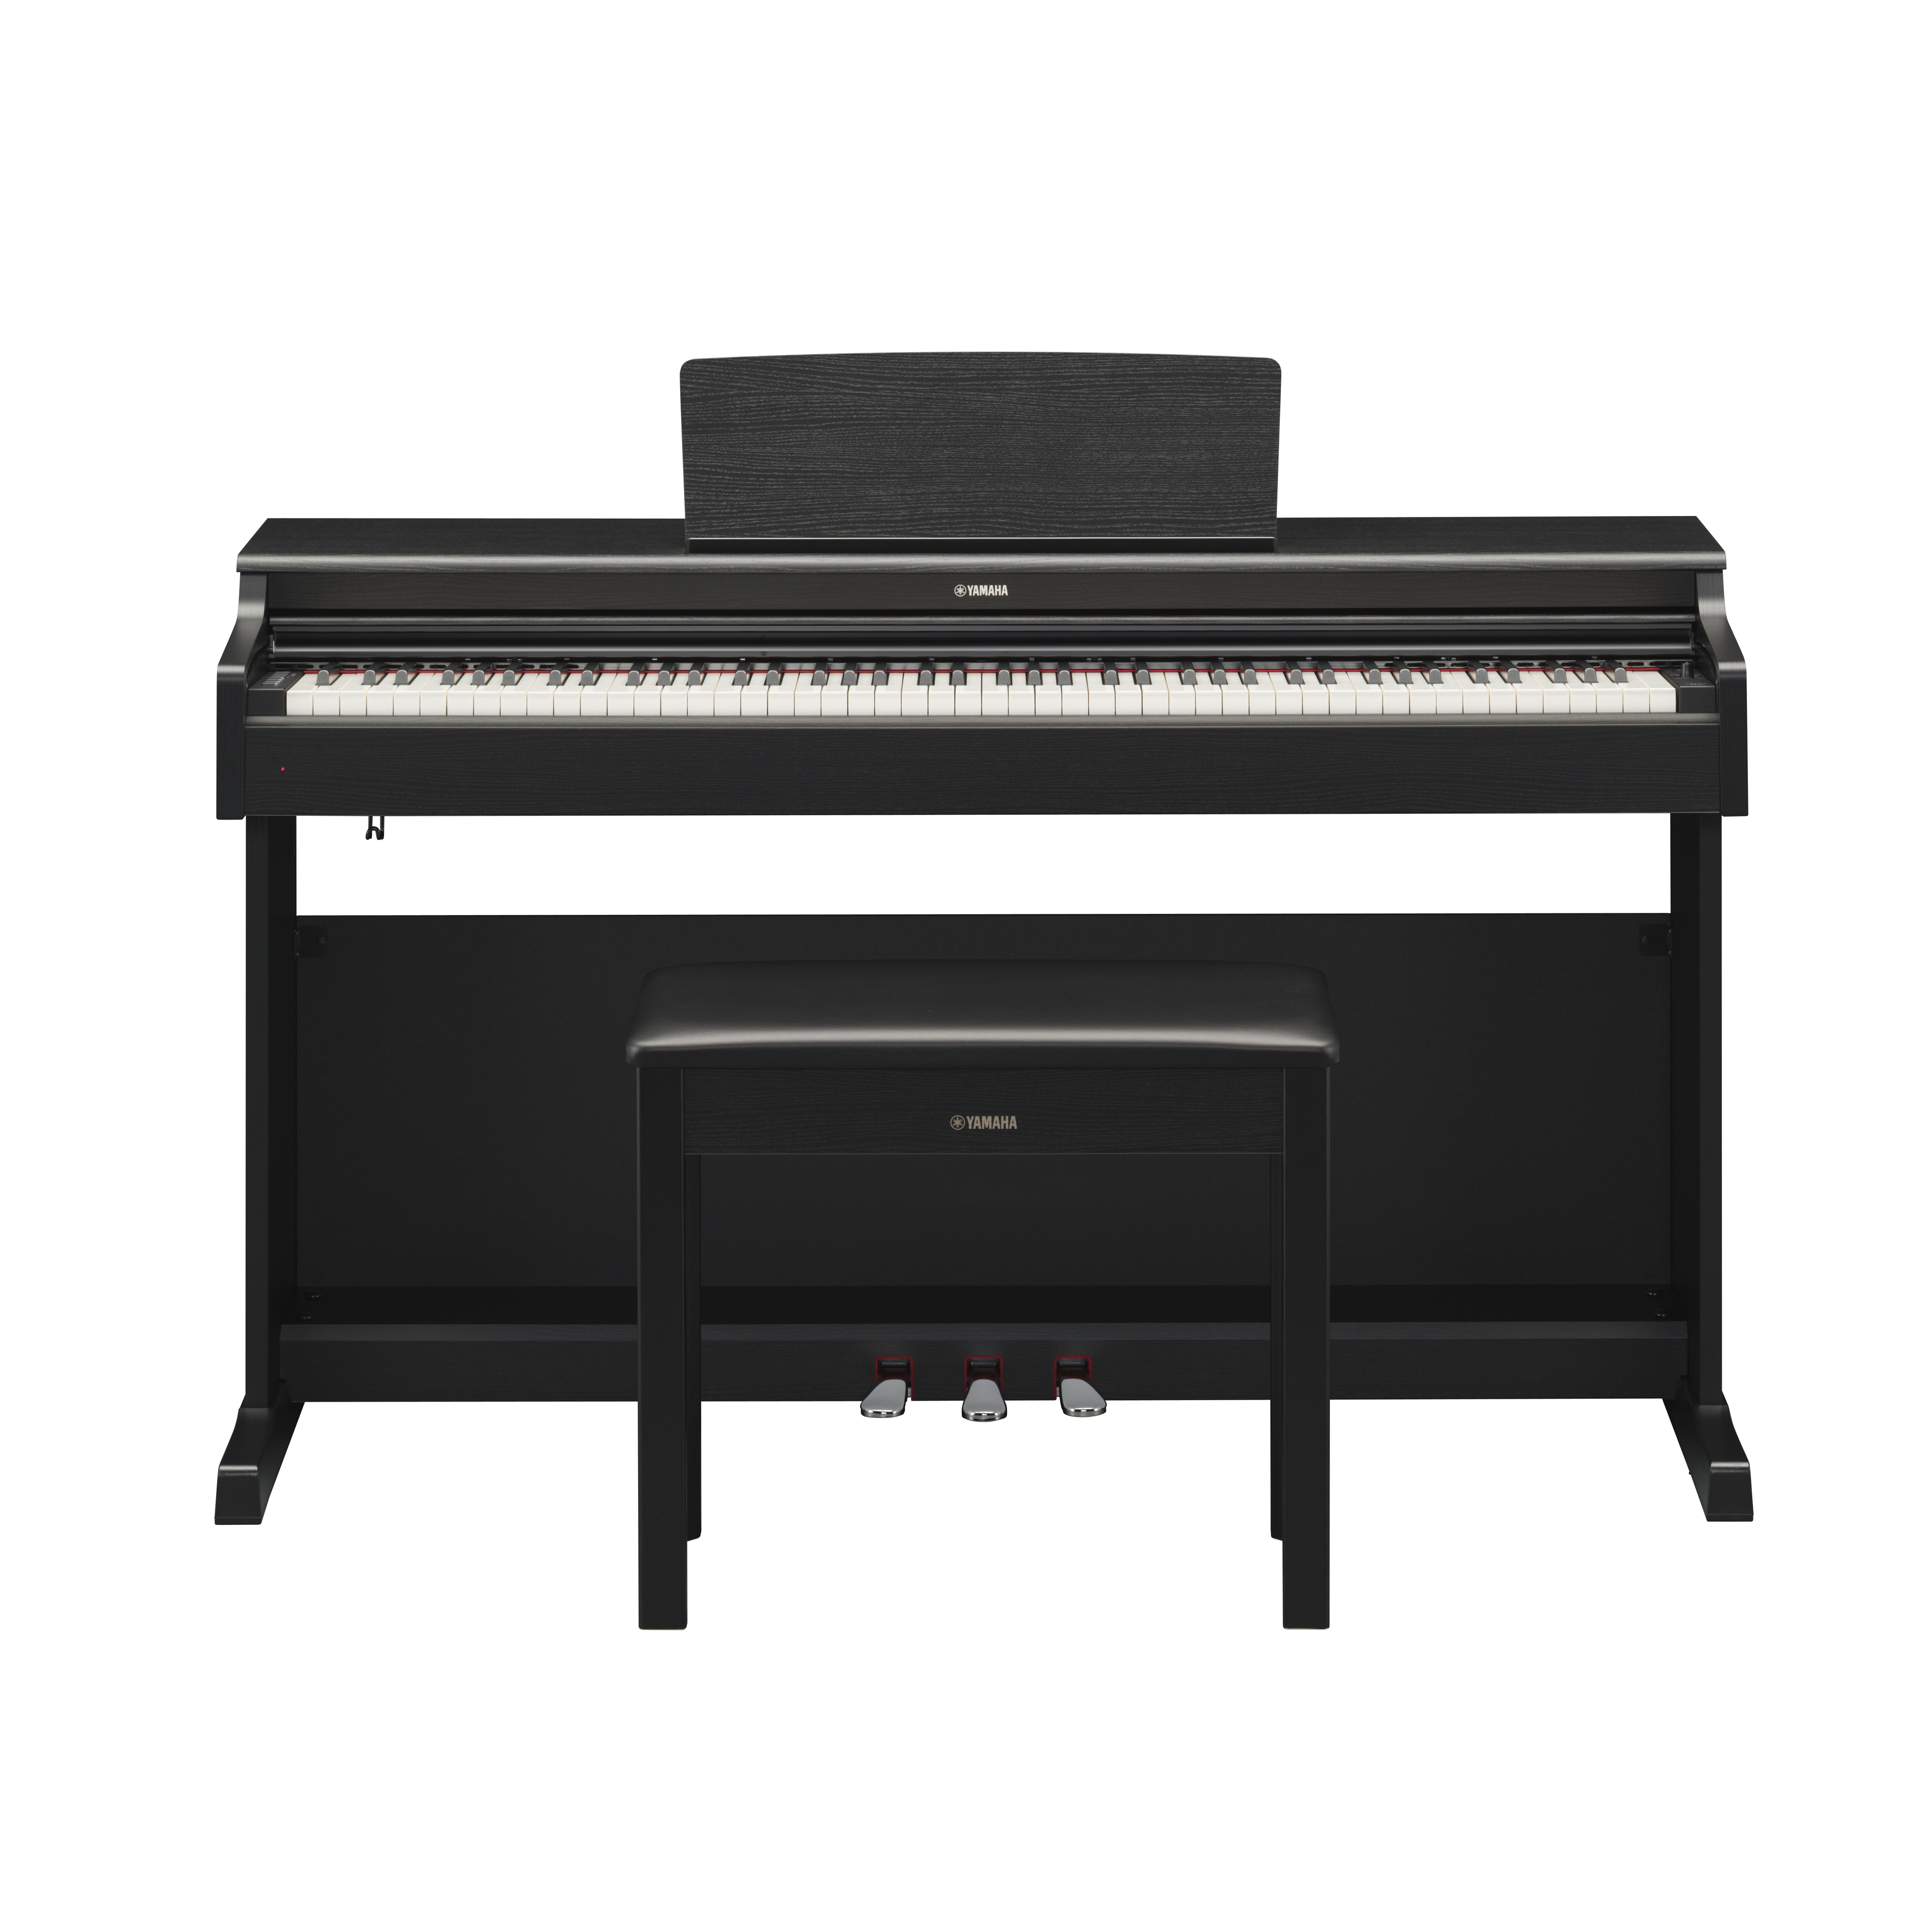 YDP-164 - Overview - ARIUS - Pianos - Musical Instruments ...